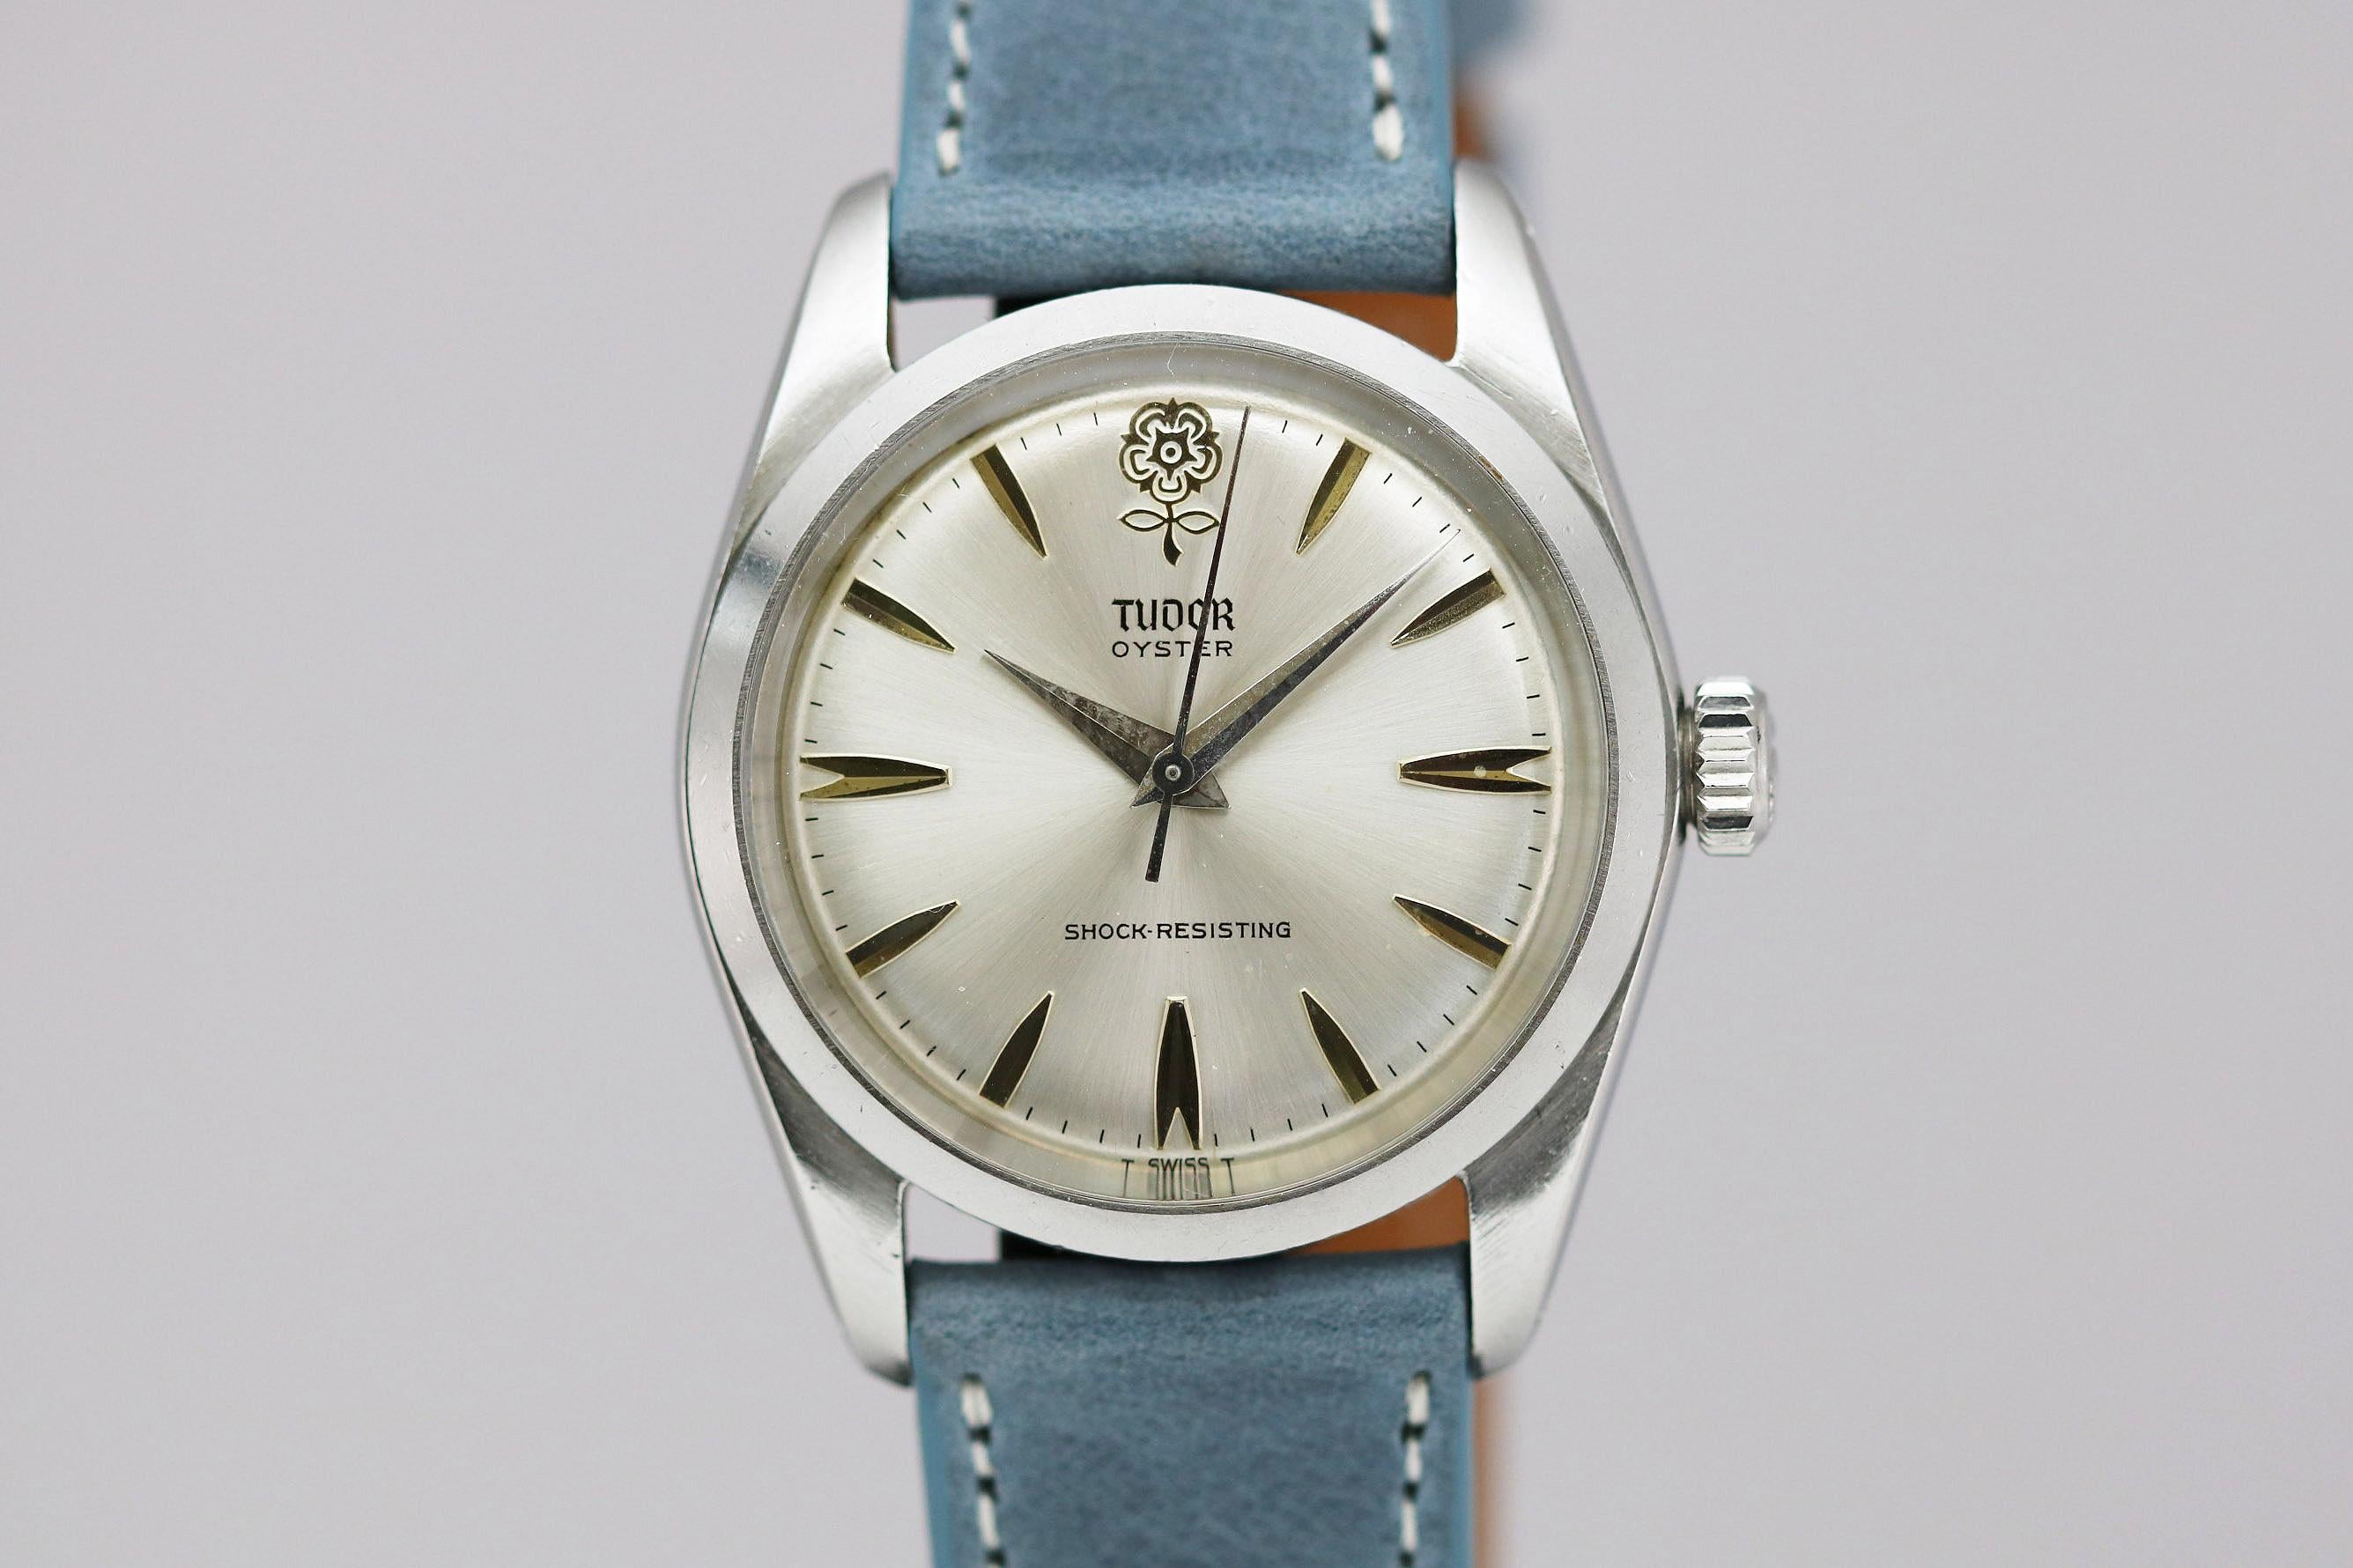 Tudor Stainless Steel Oyster Shock Resisting Ref 7934 Wristwatch, circa 1965 1